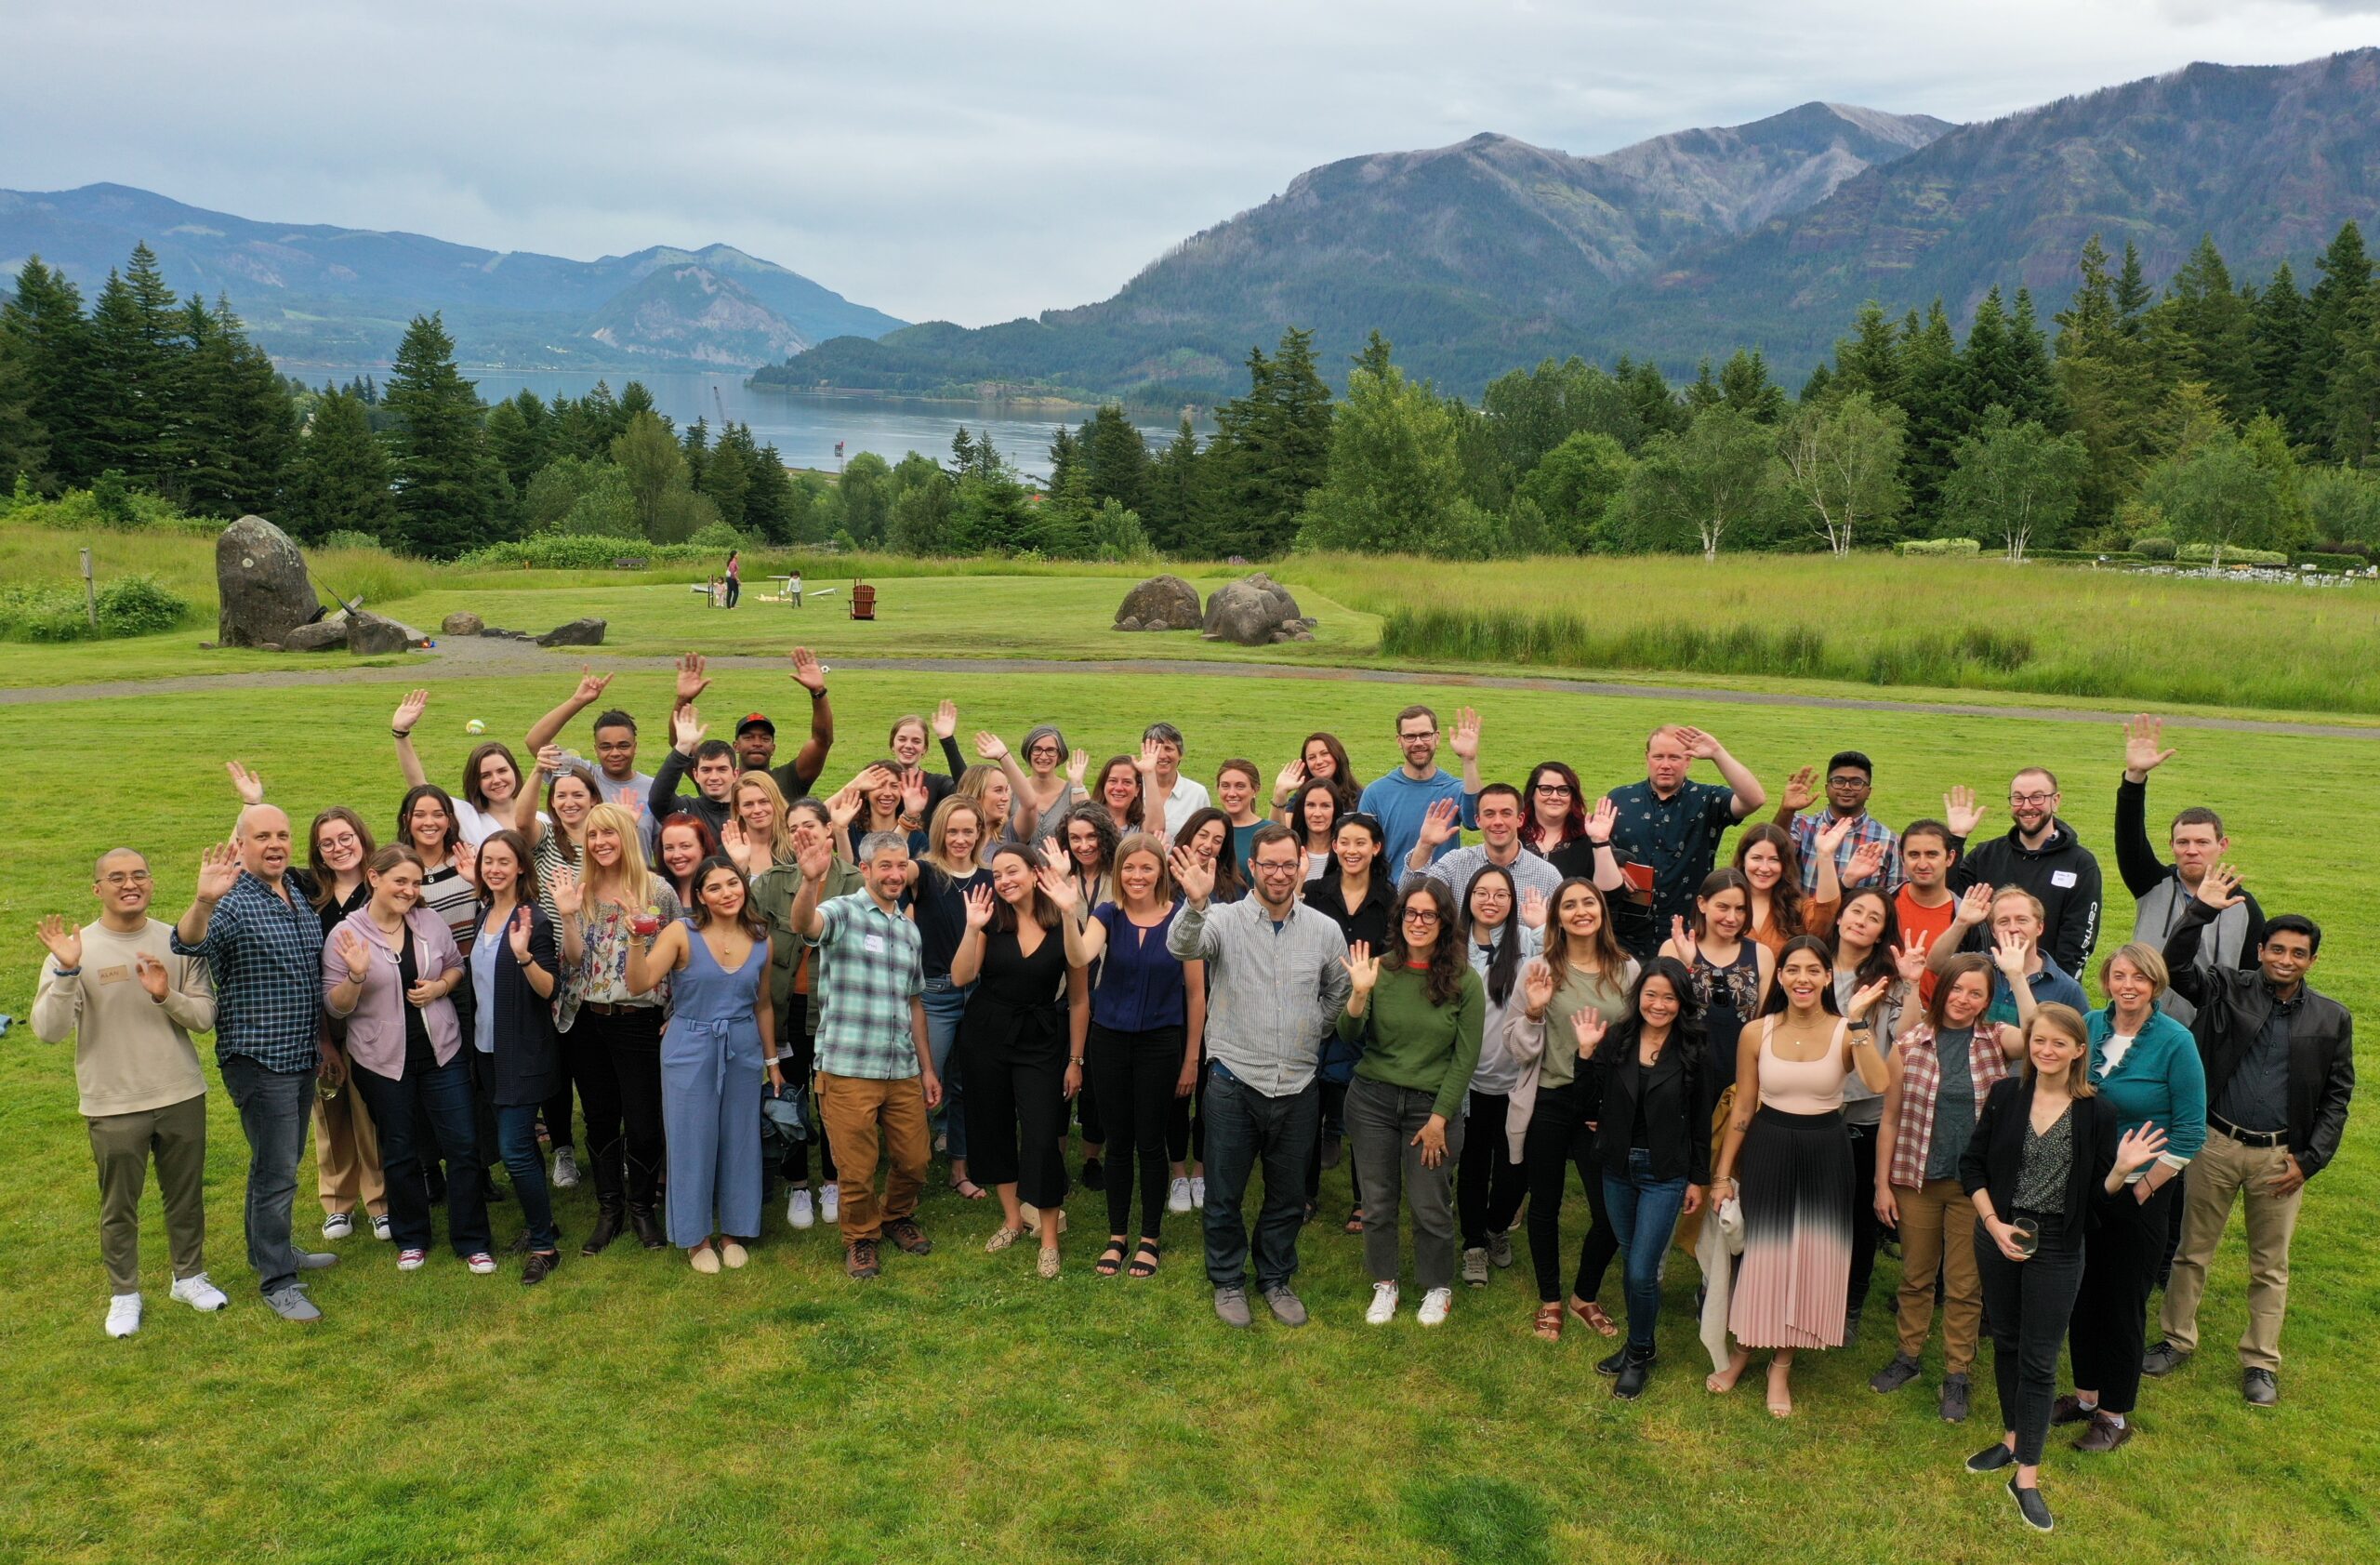 The Brightworks Sustainability team at Skamania Lodge during an annual retreat in 2022